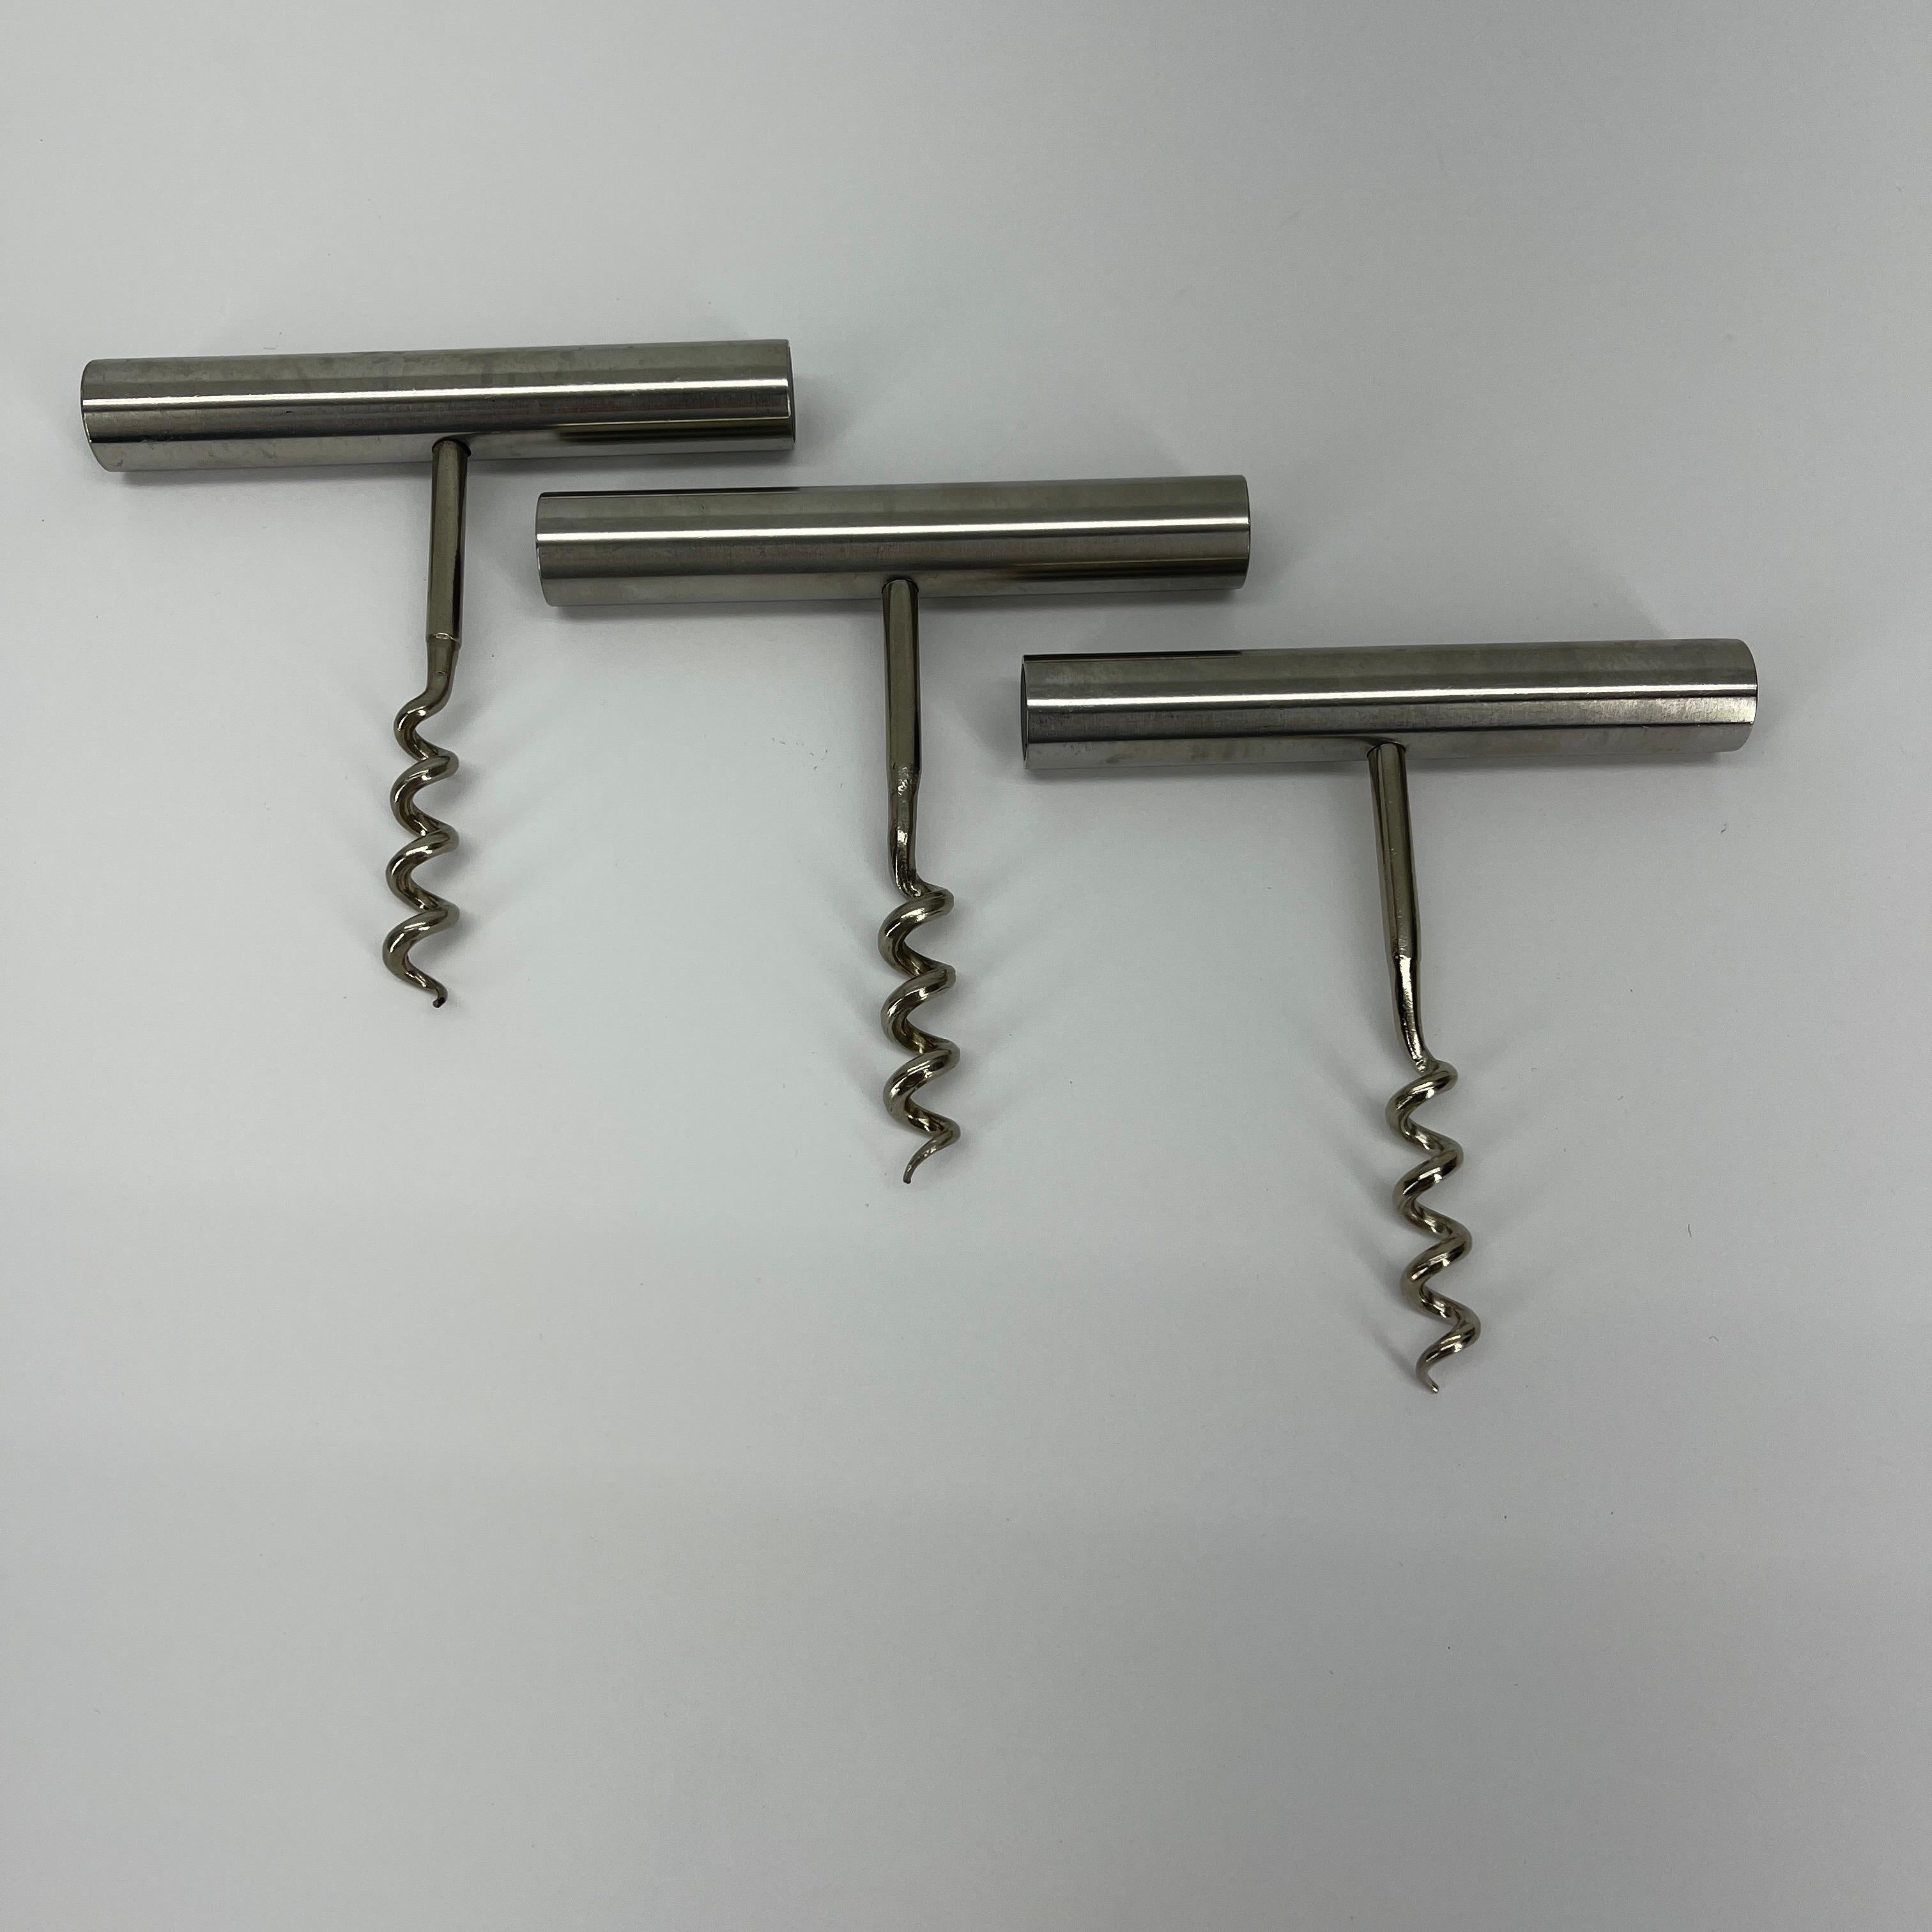 Stelton Set of three Danish Mid-Century Modern stainless steel corkscrews.
Classic modern Danish corkscrews which are simple in design and easy to use. Stainless steel in very good condition. Lean and clean design will grace your bar with elegance